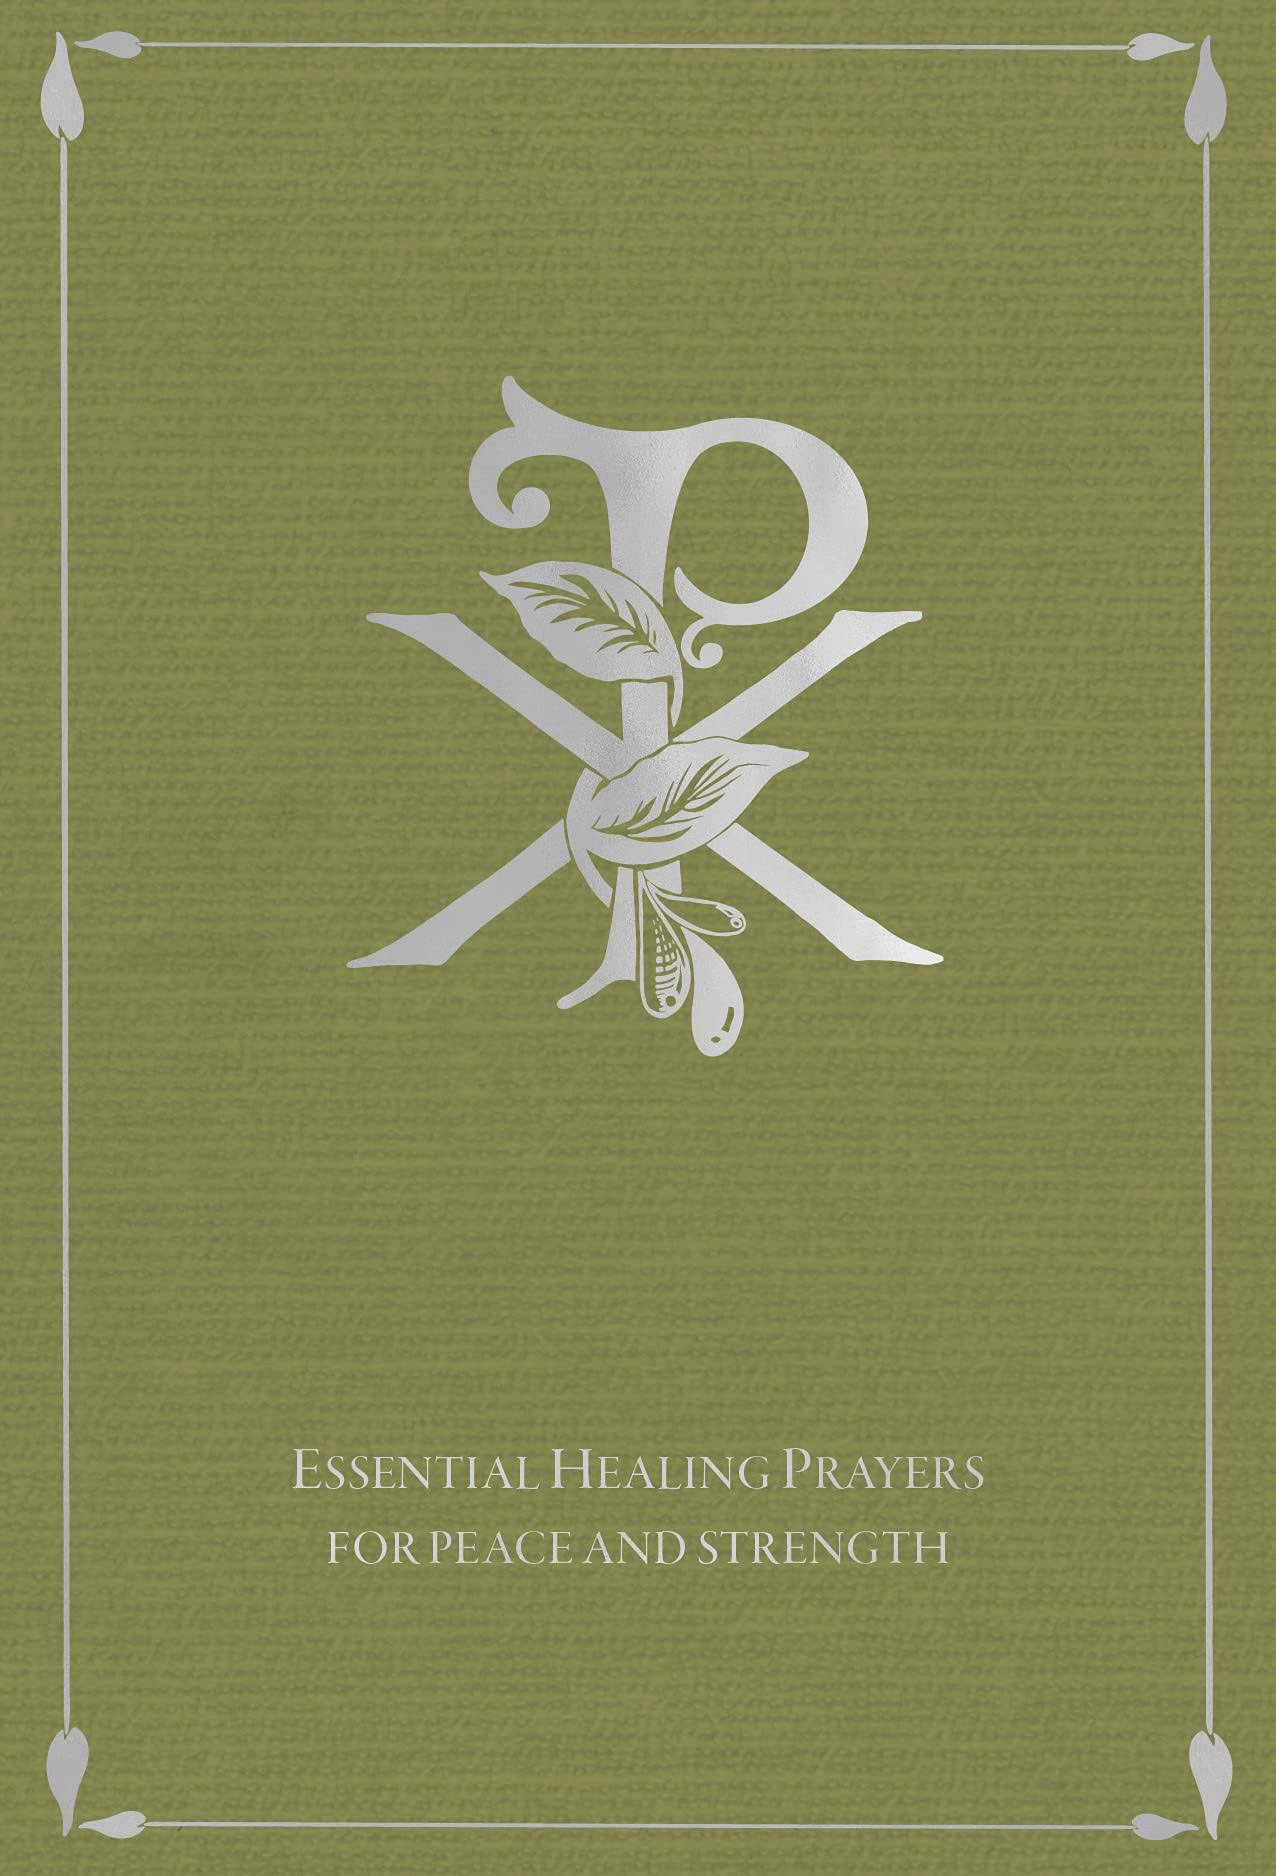 Essential Healing Prayers: For Peace and Strength [Book]